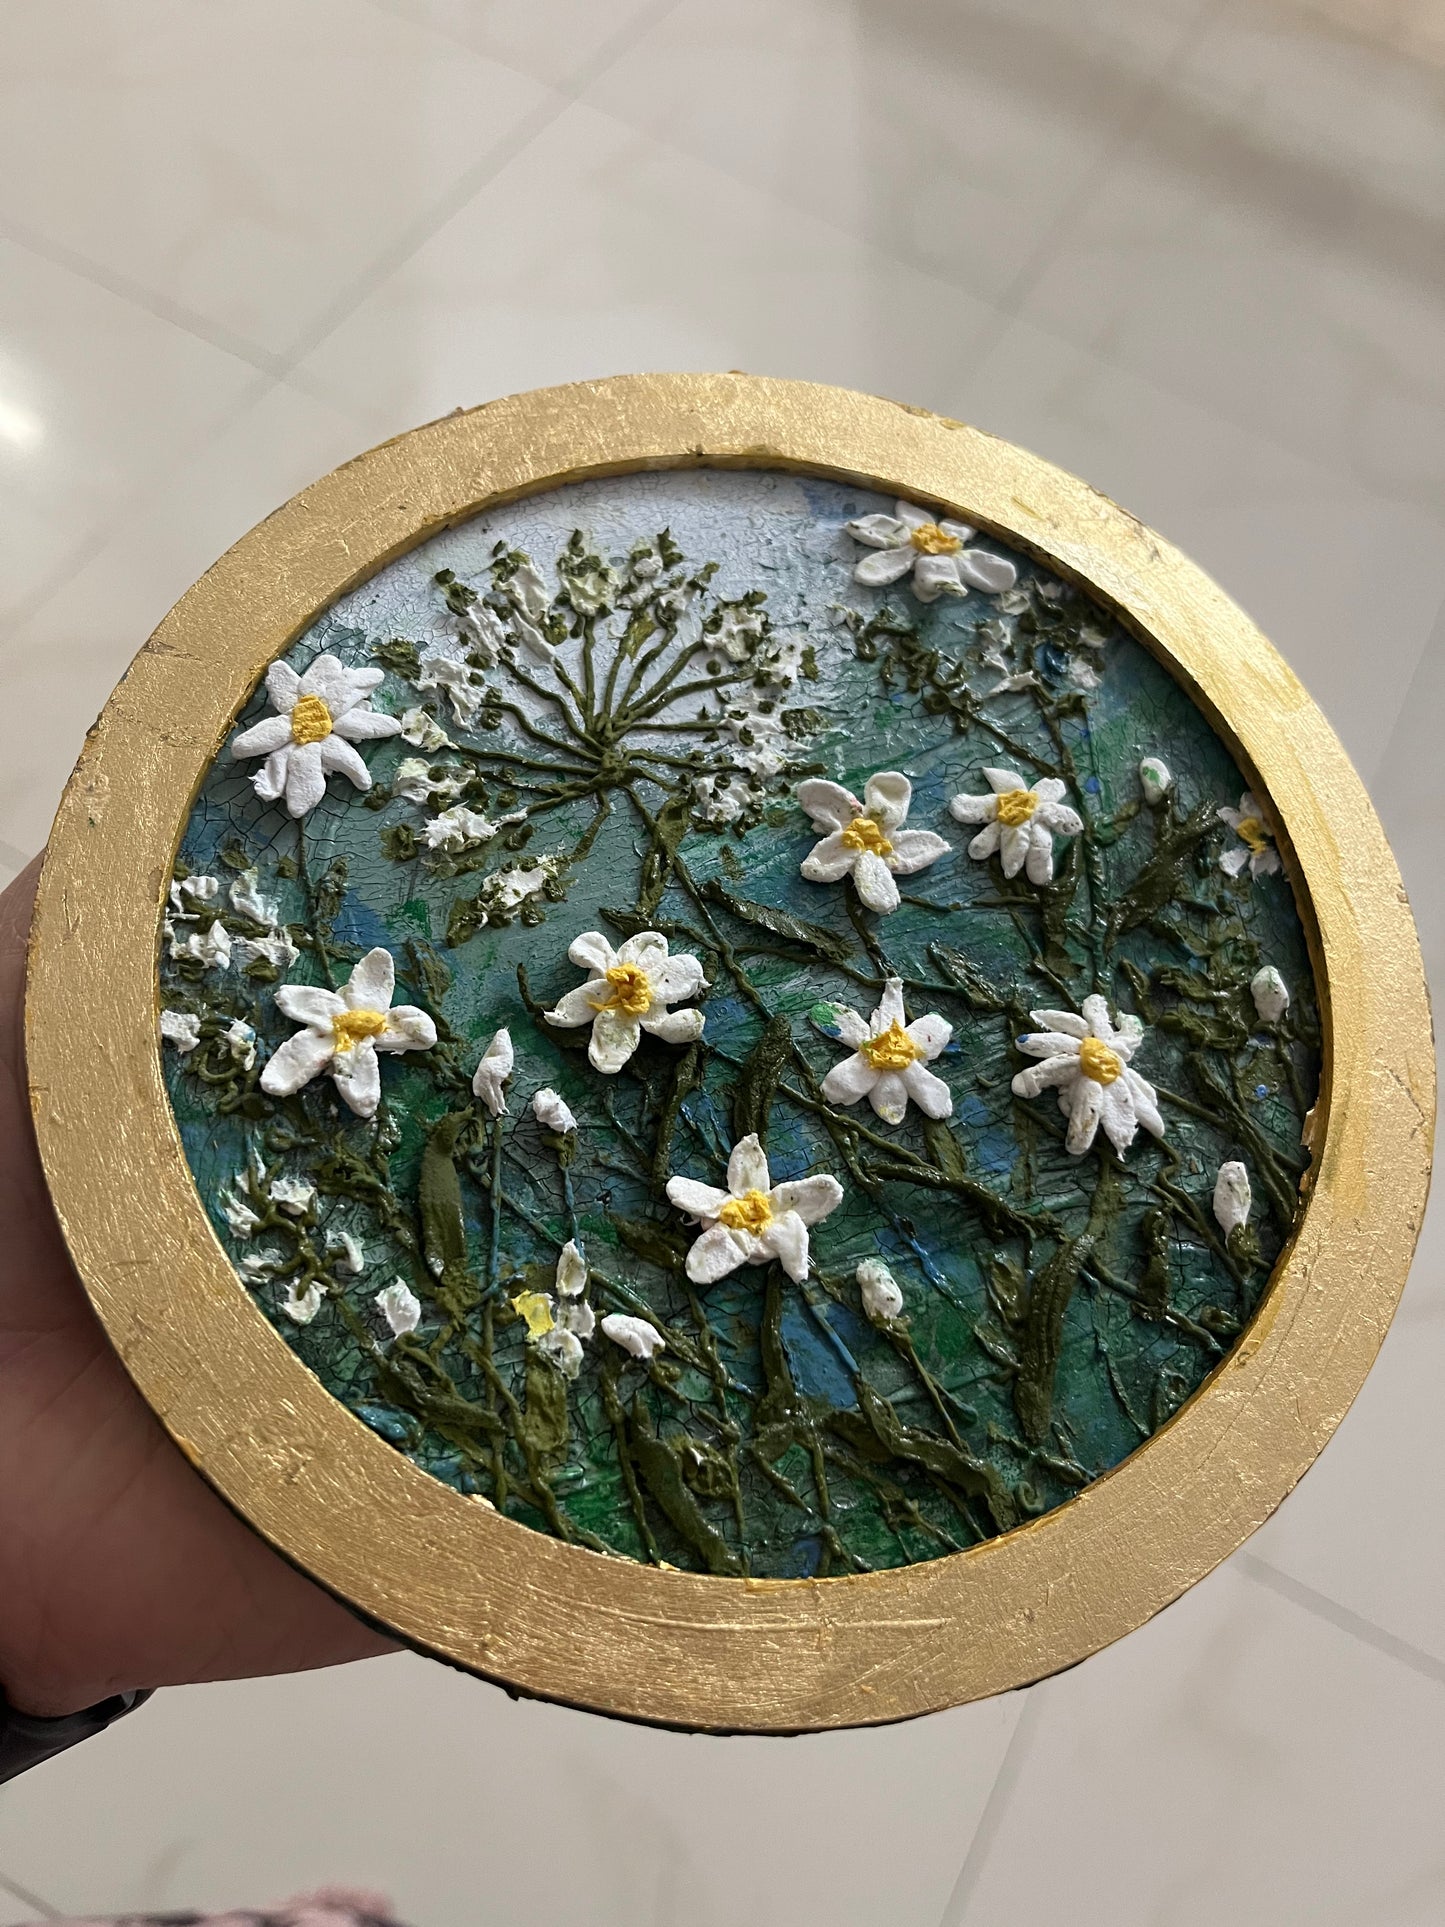 Summer , white flowers painting 6 inches in diameter round in shape